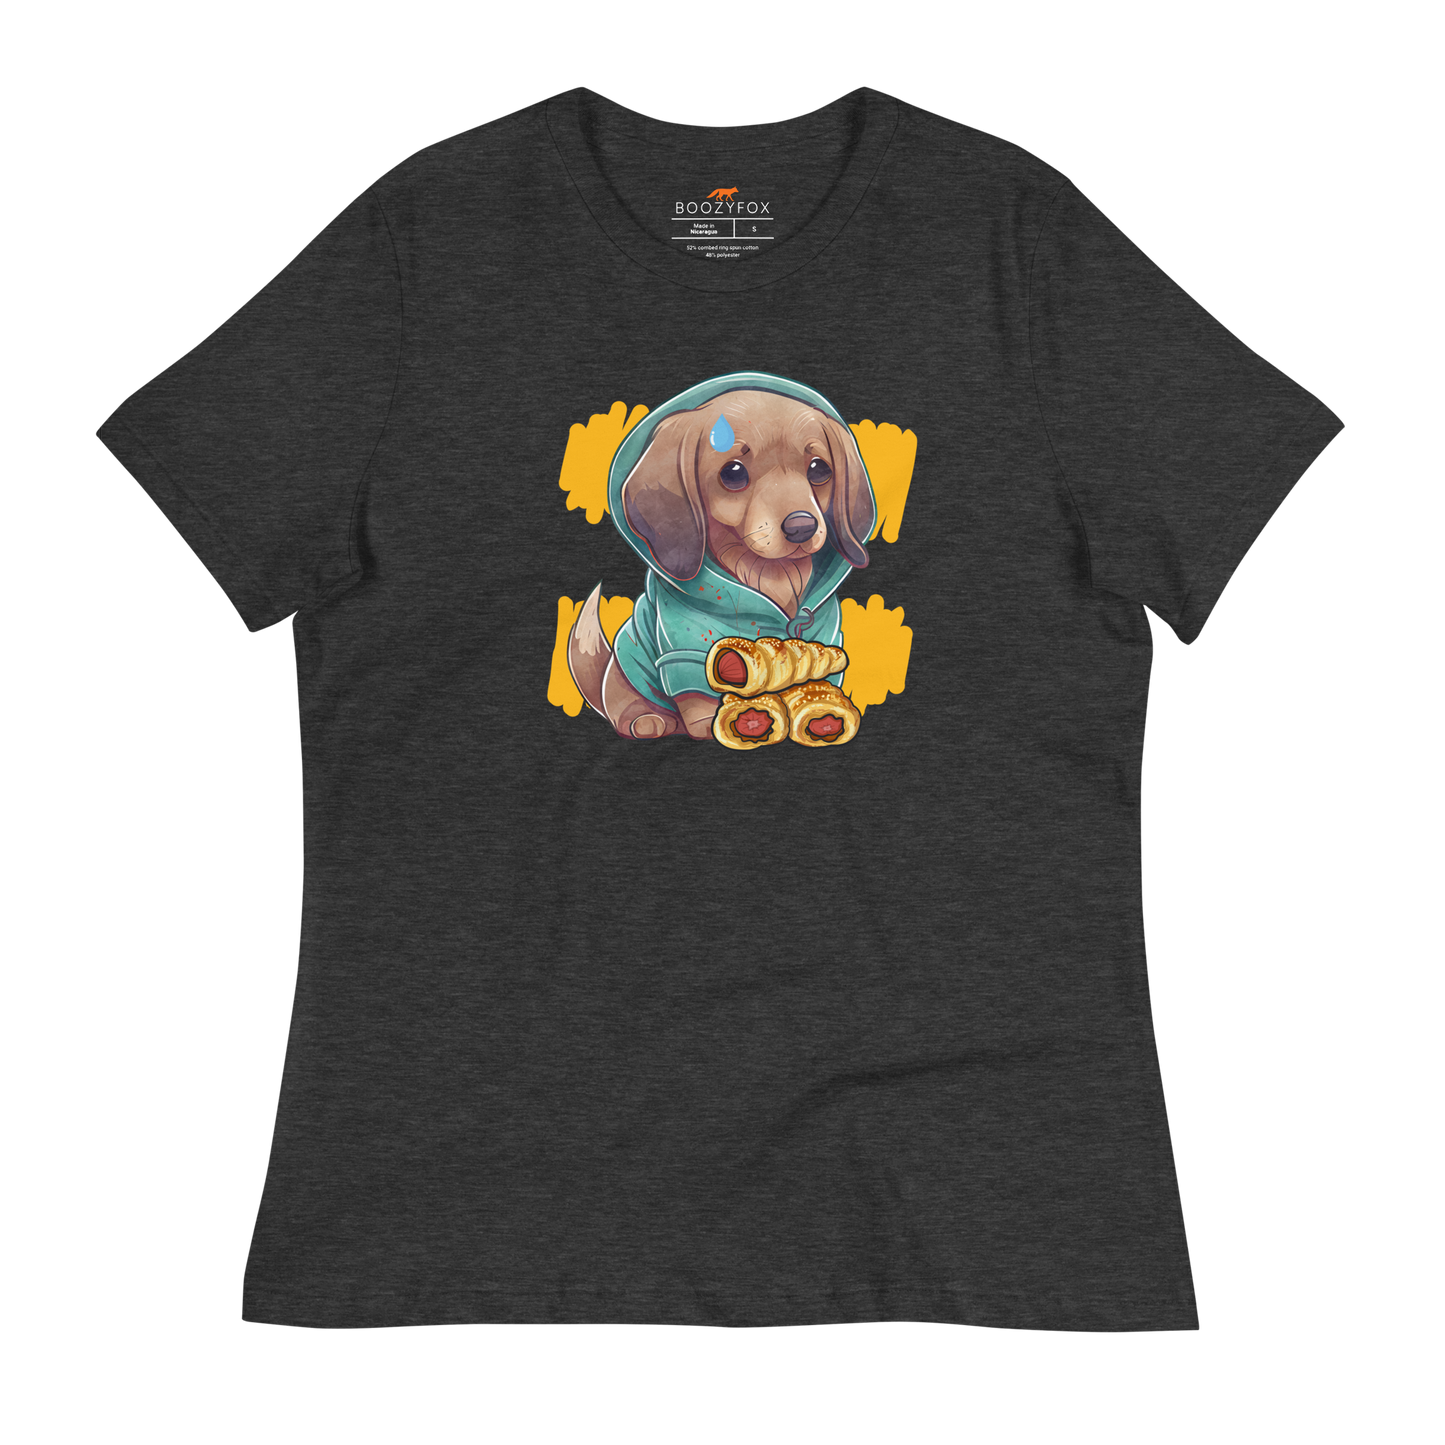 Women's relaxed dark grey heather Sausage Dog t-shirt featuring an adorable dachshund sausage dog graphic on the chest - Women's Cute Graphic Dachshund Tees - Boozy Fox